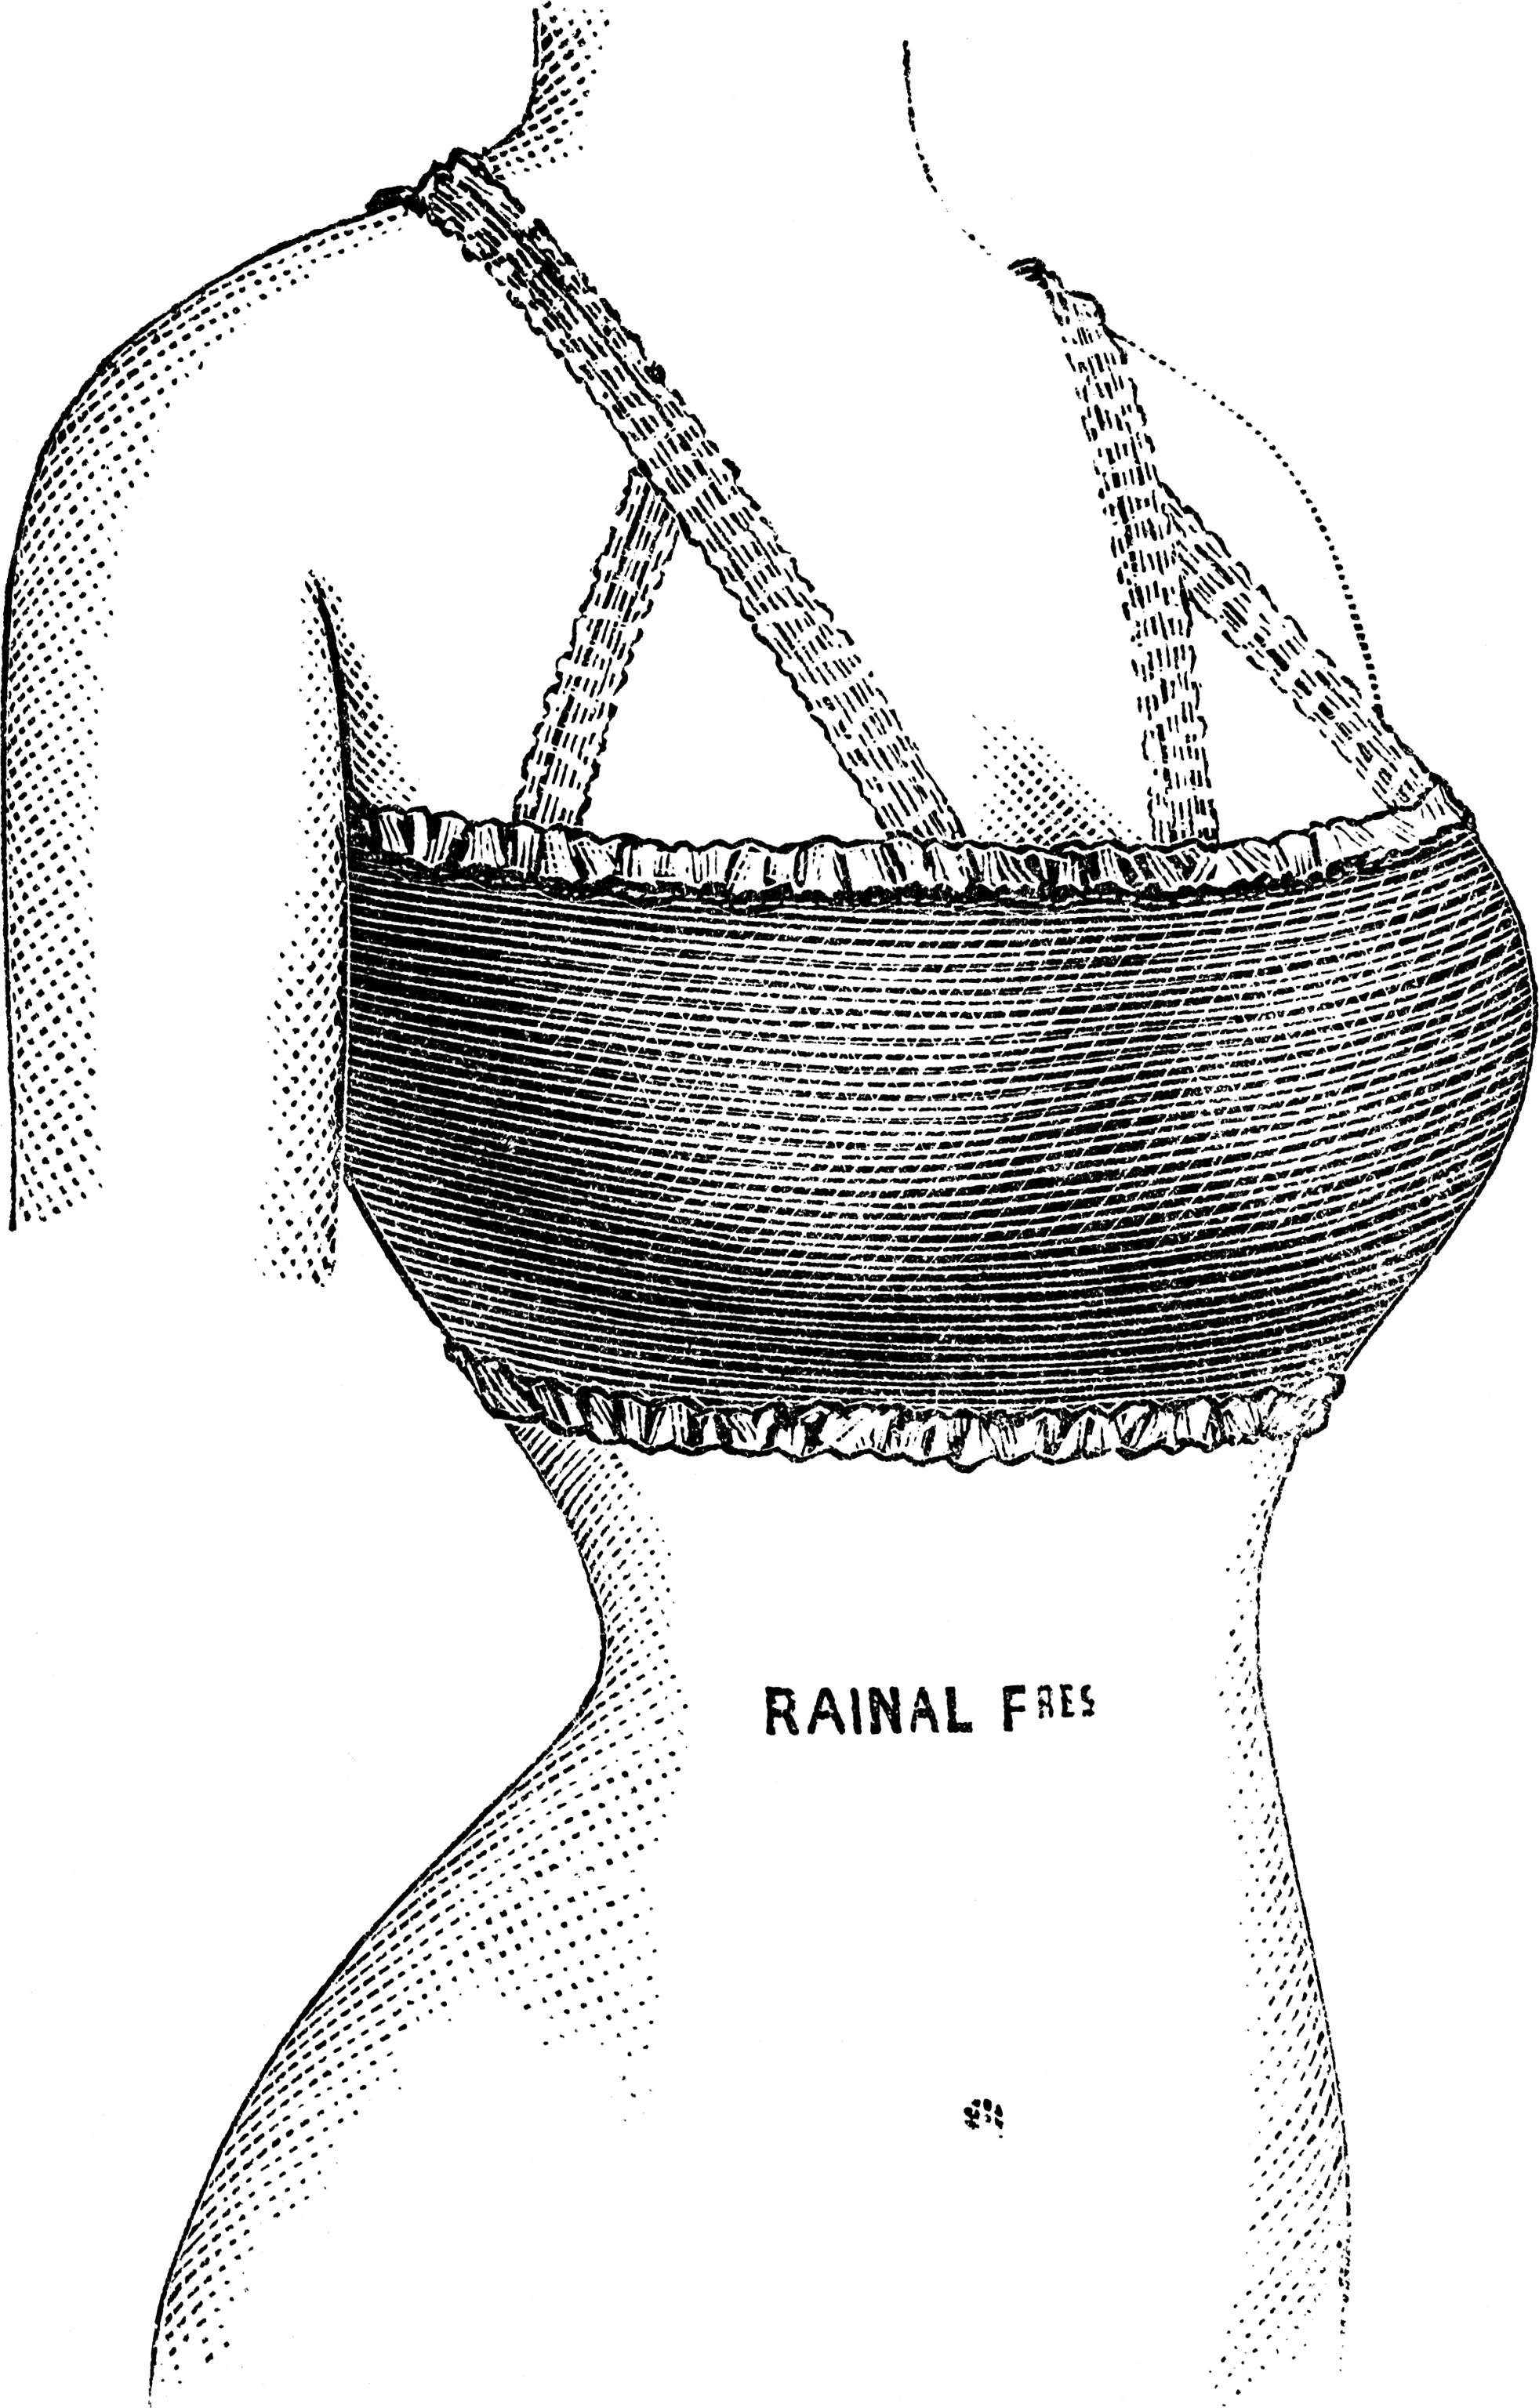 Breast supporting act: a century of the bra